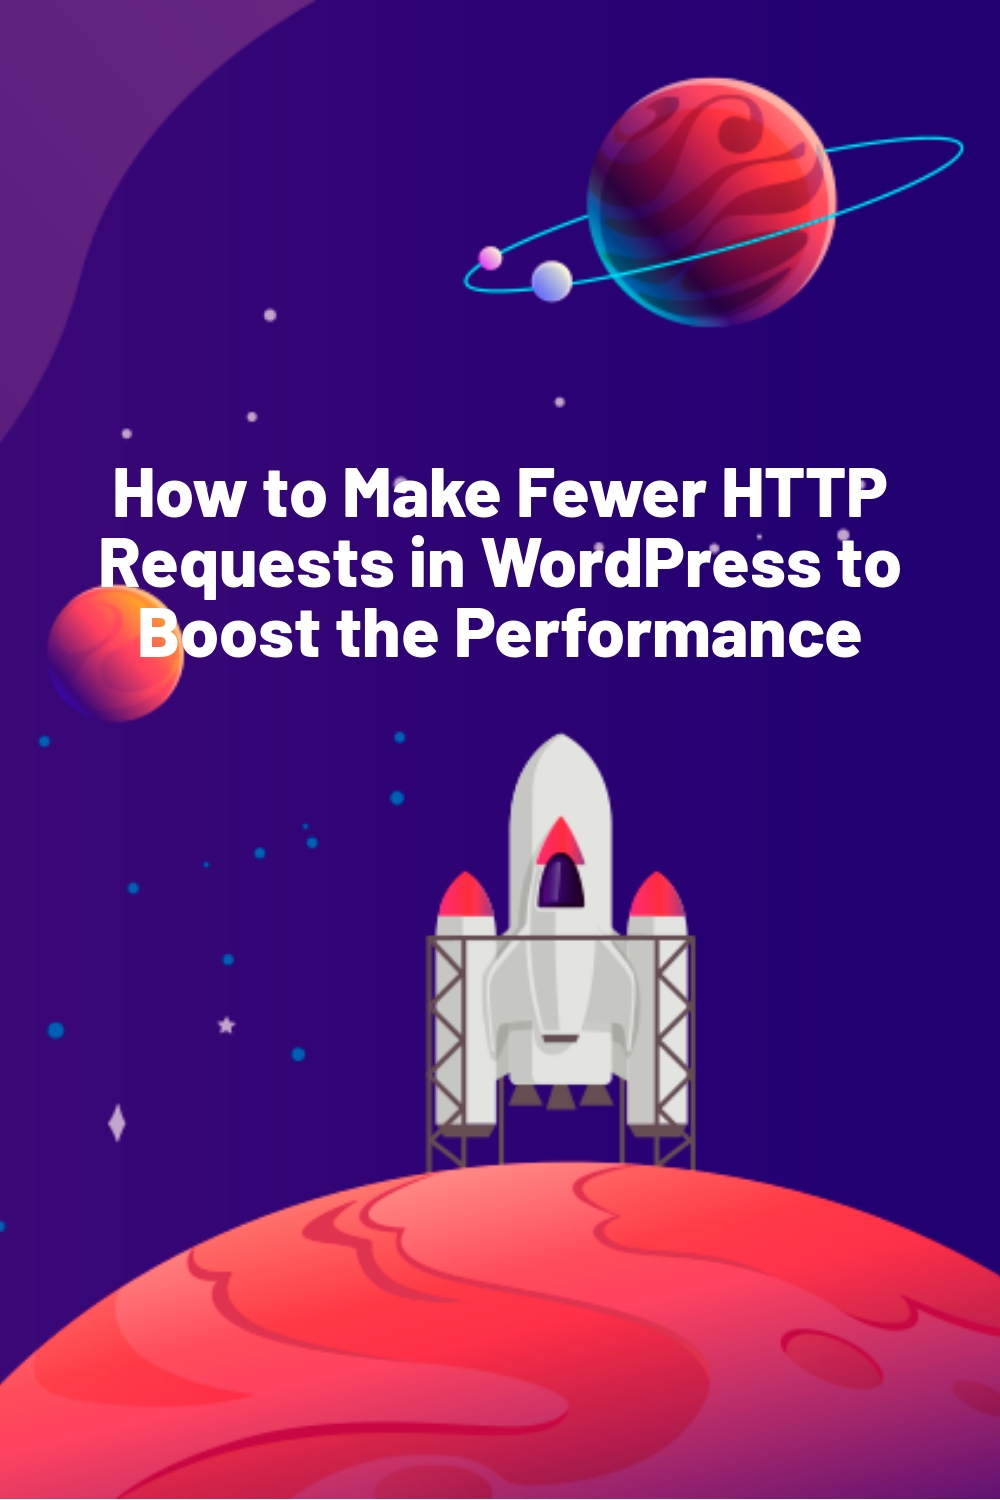 How to Make Fewer HTTP Requests in WordPress to Boost the Performance